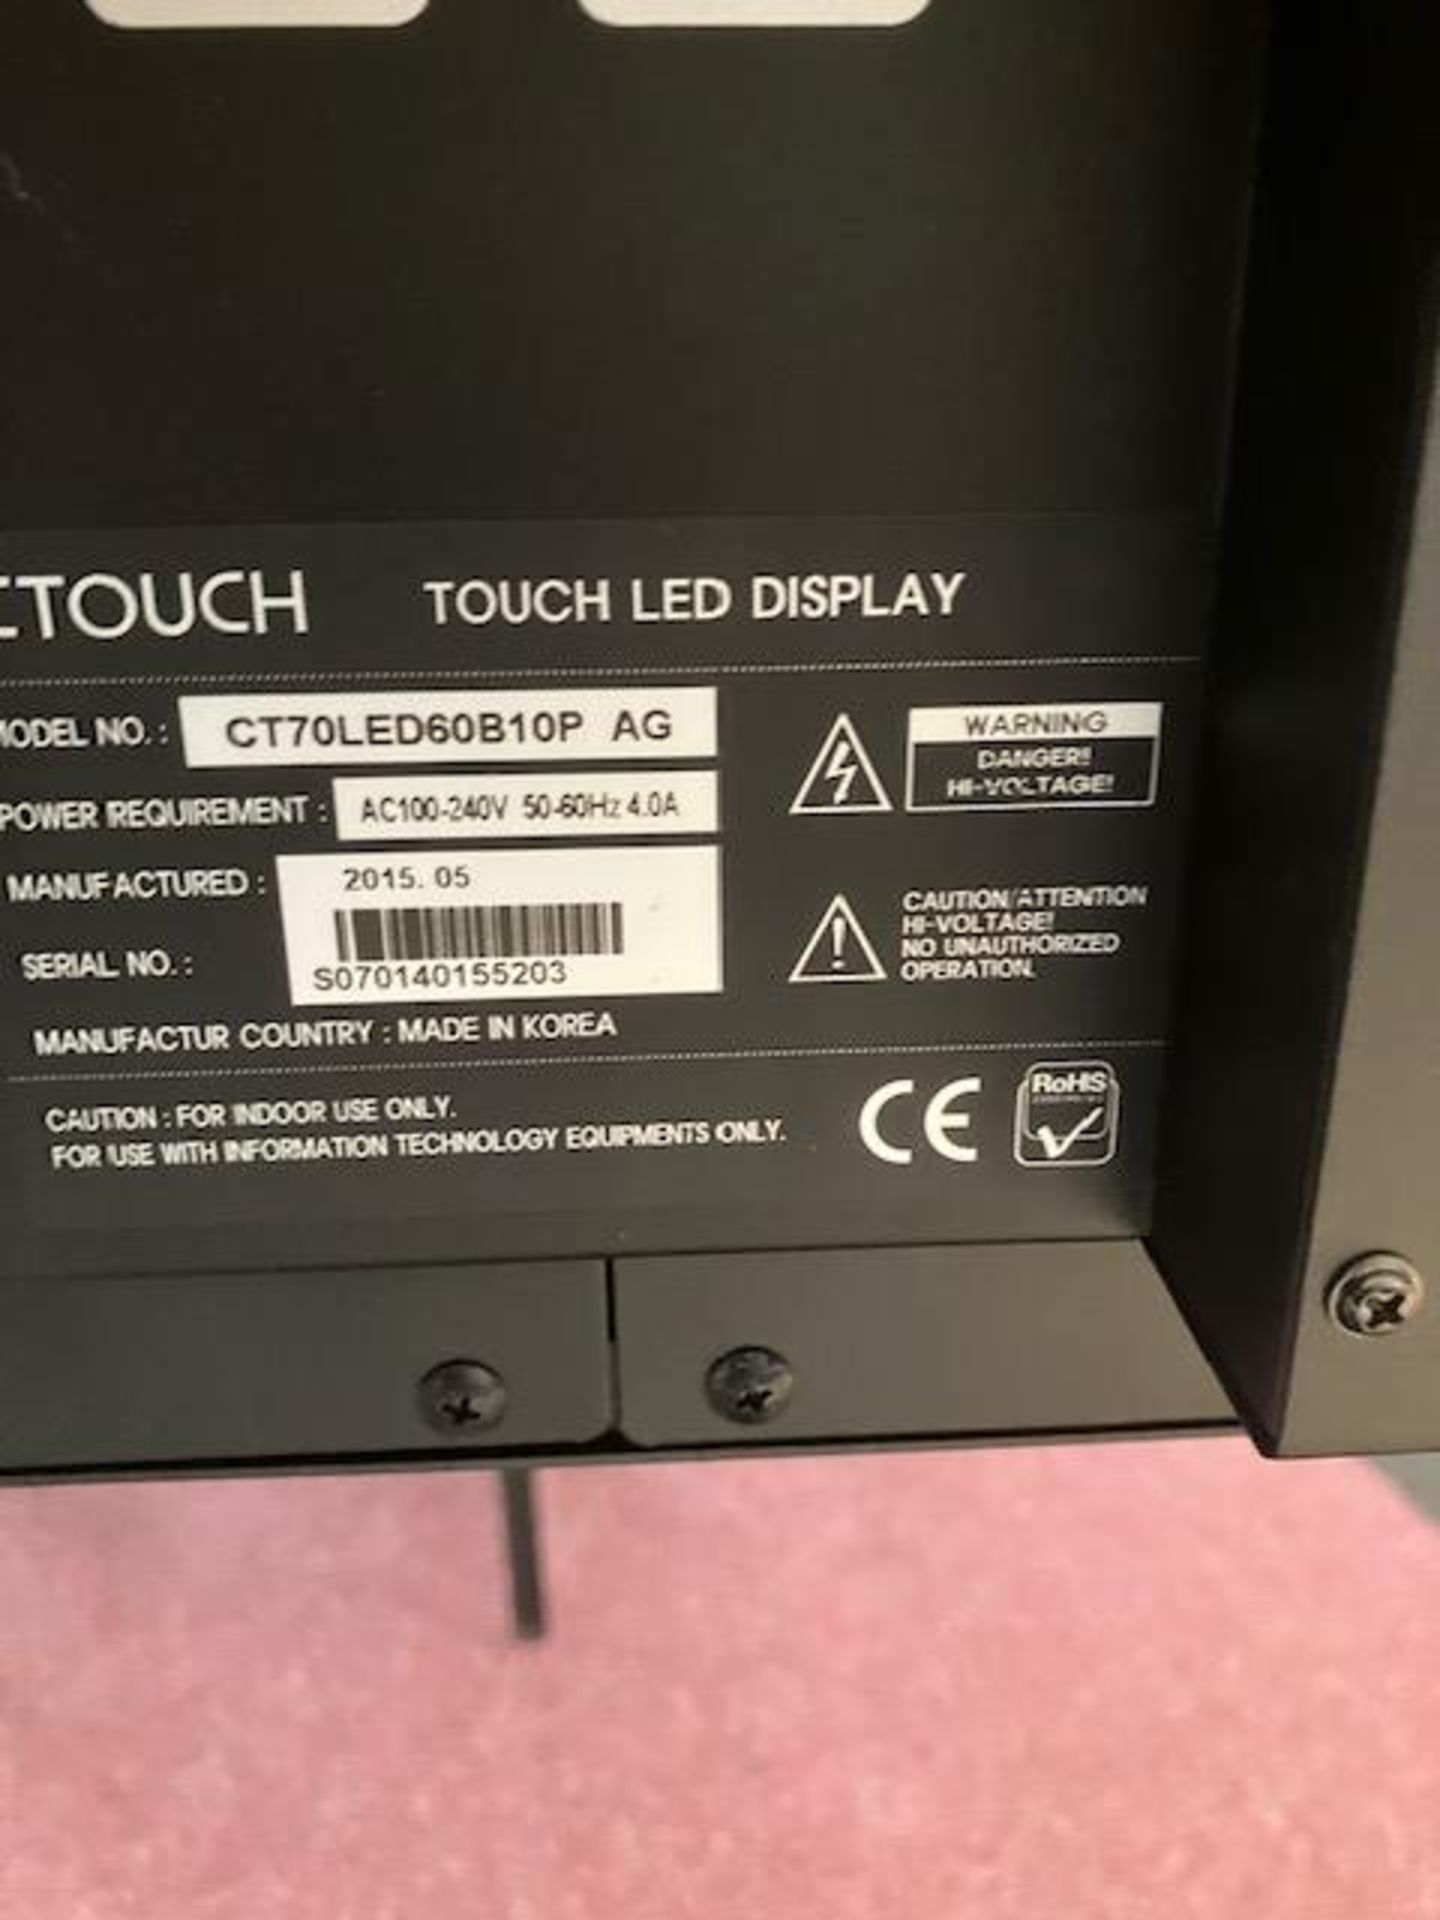 C Touch LED display, model no. CT70LED60D10P, serial no. 5075145155203, version SO7014015208-003N, m - Image 2 of 4